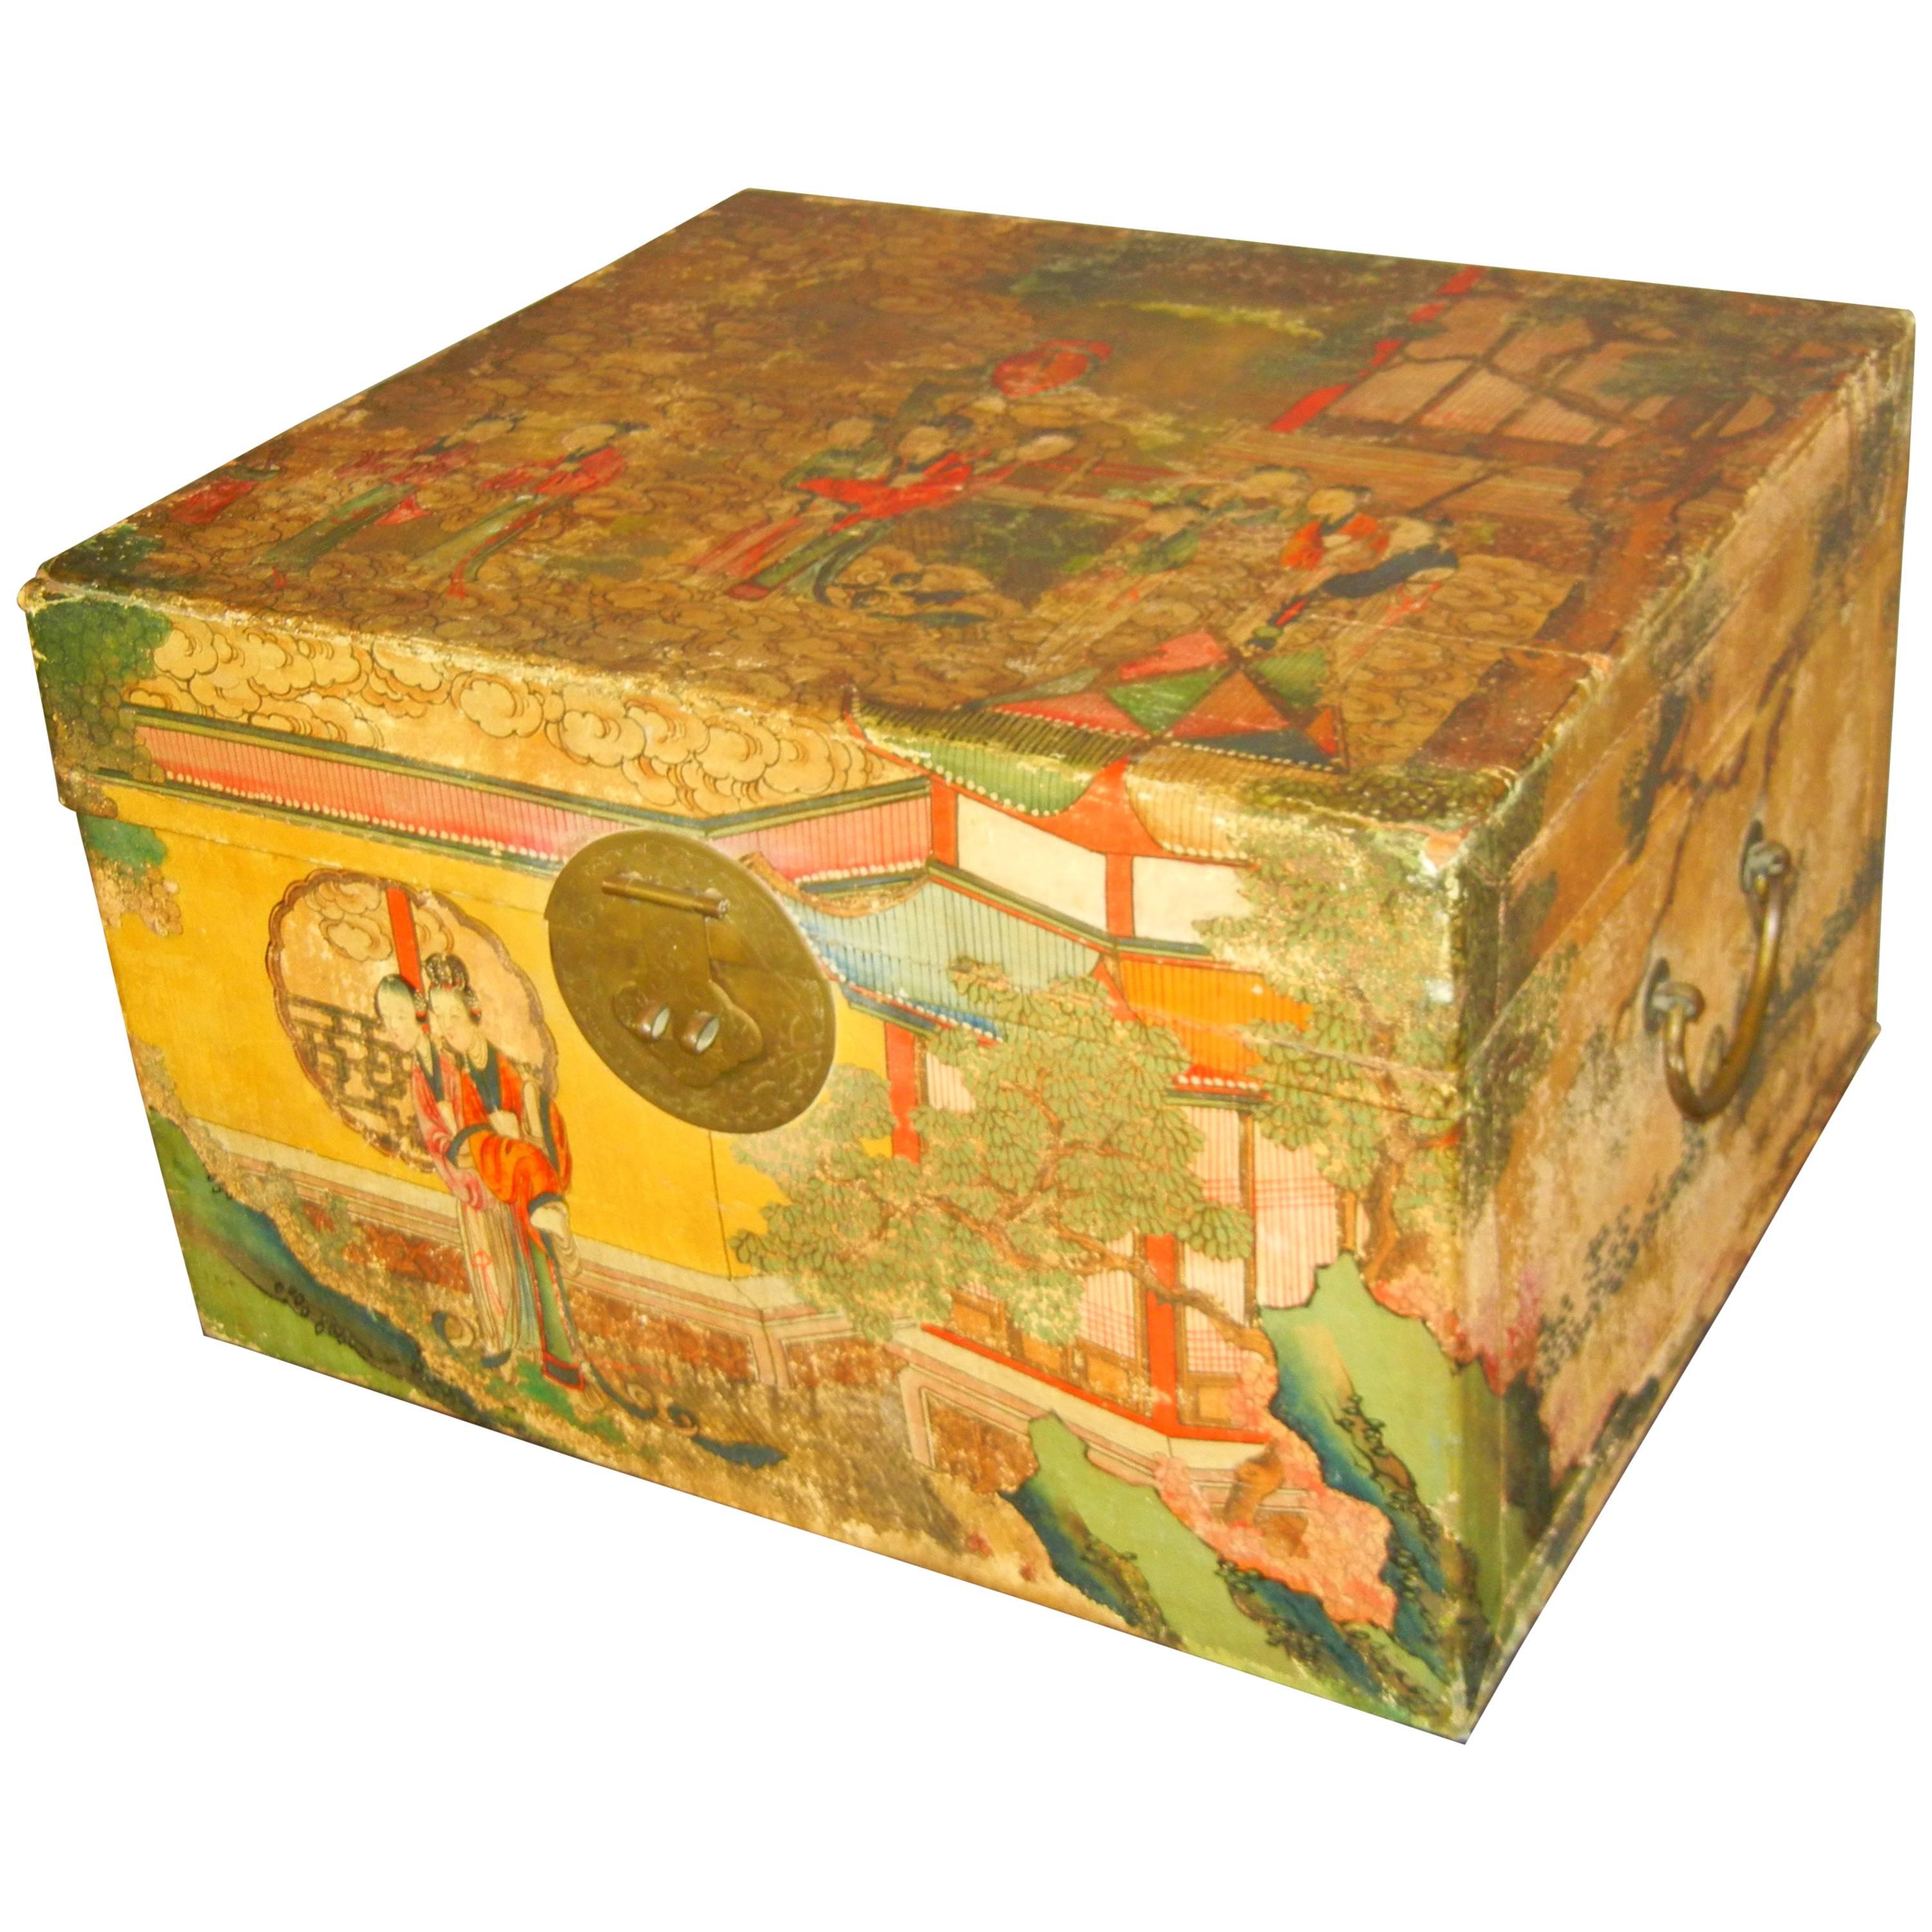 Pigskin Lady's Trunk with Painted Vignettes and Silk Lining, China, 1885